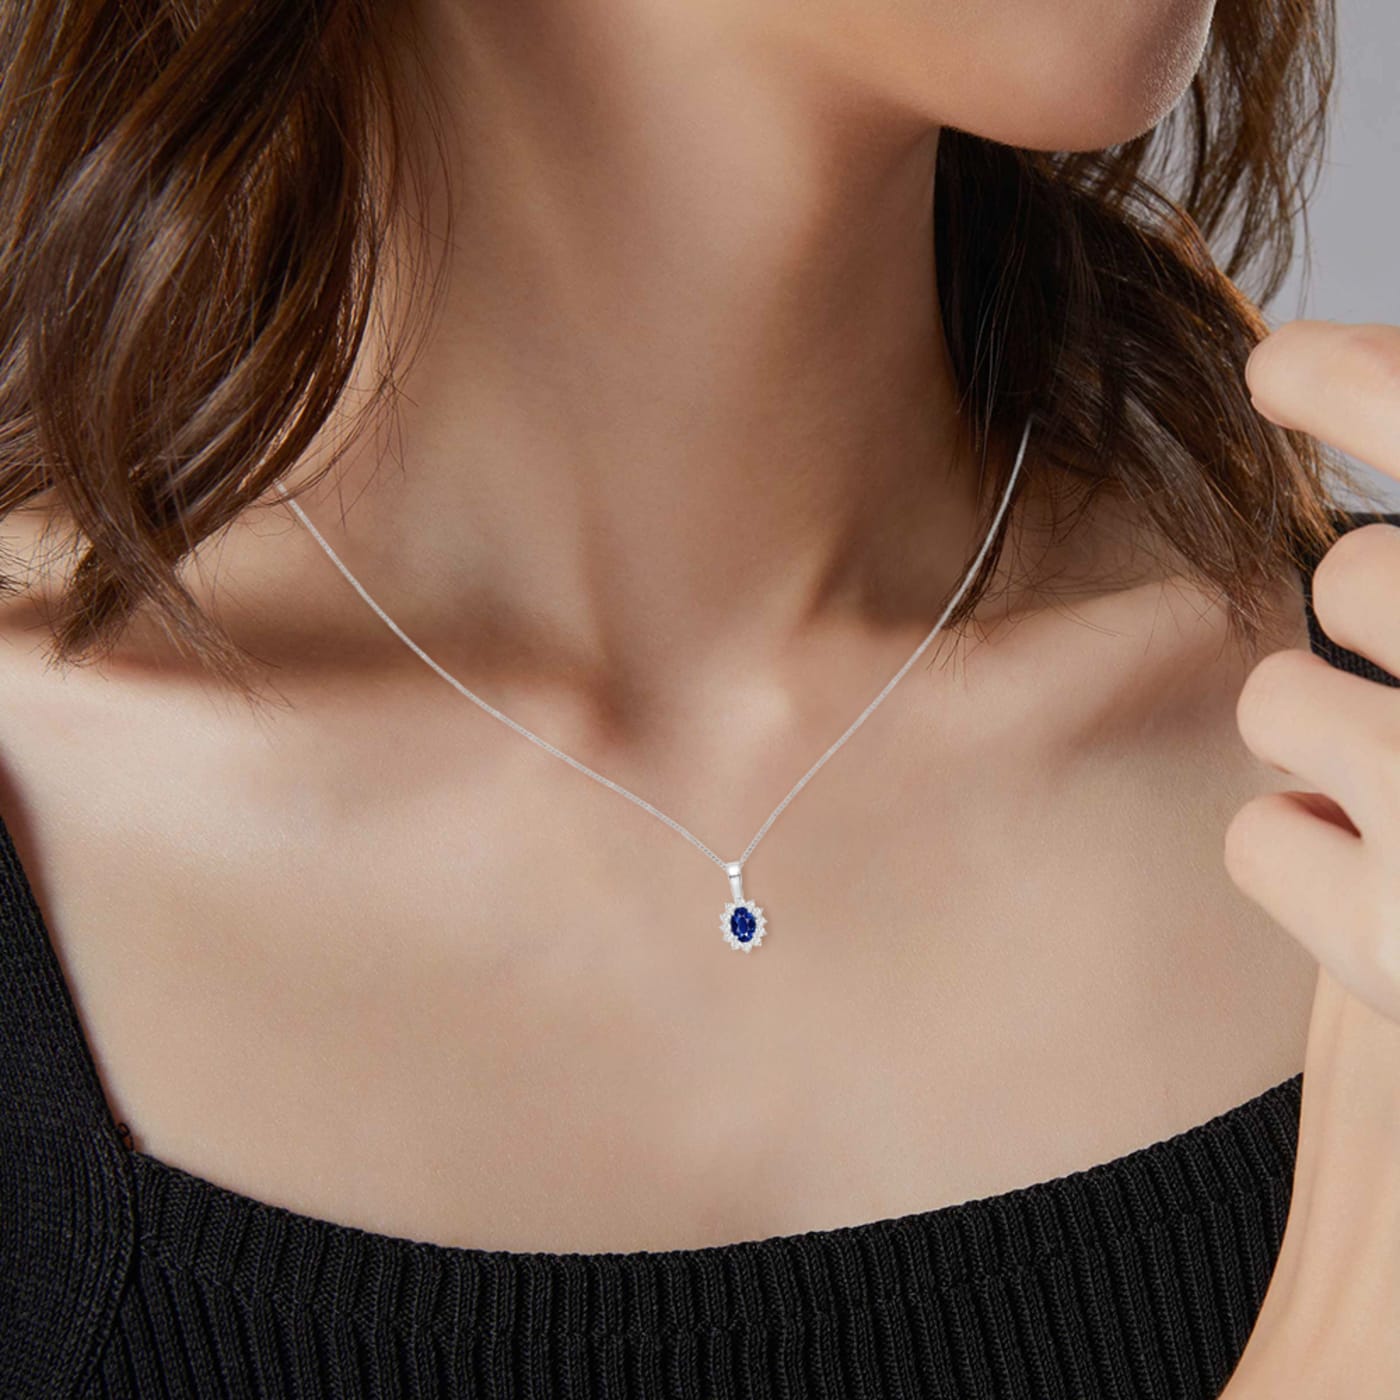 1.26 ctw Oval Blue Sapphire and Diamond Pendant in 14K Yellow Gold with A 16 inch 14K Yellow Gold Chain